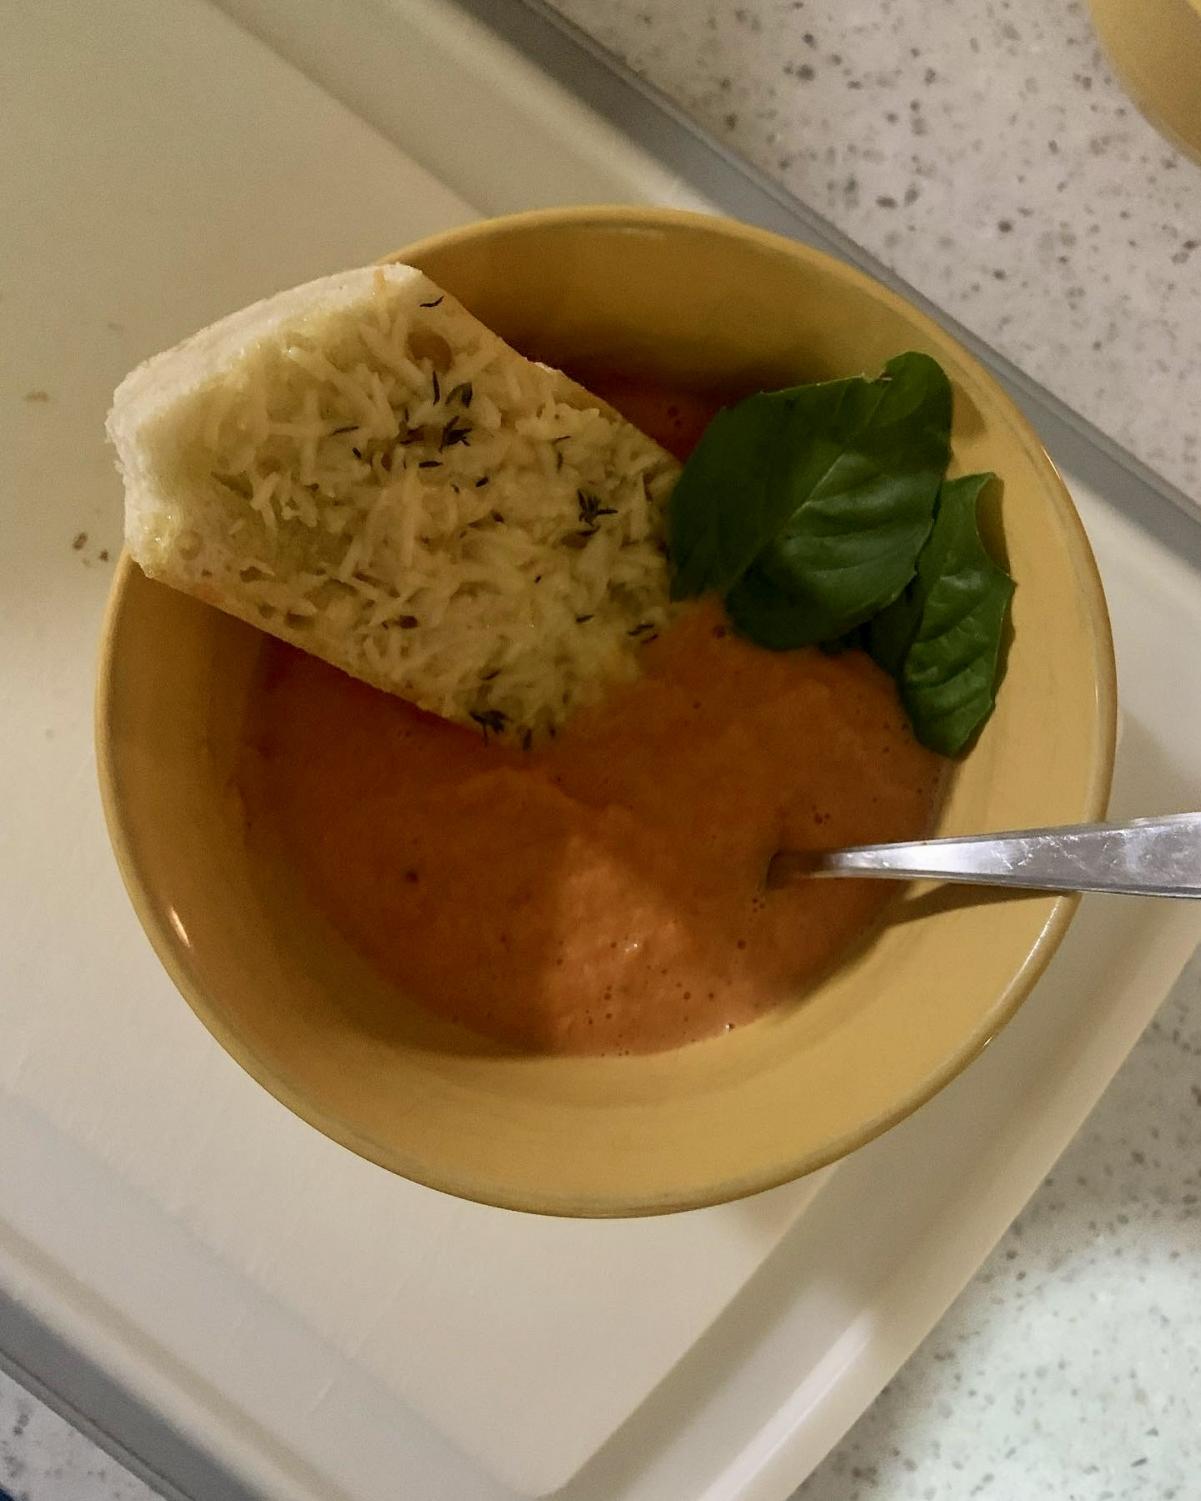 Tomato soup is a process, but it is so worth it in the end